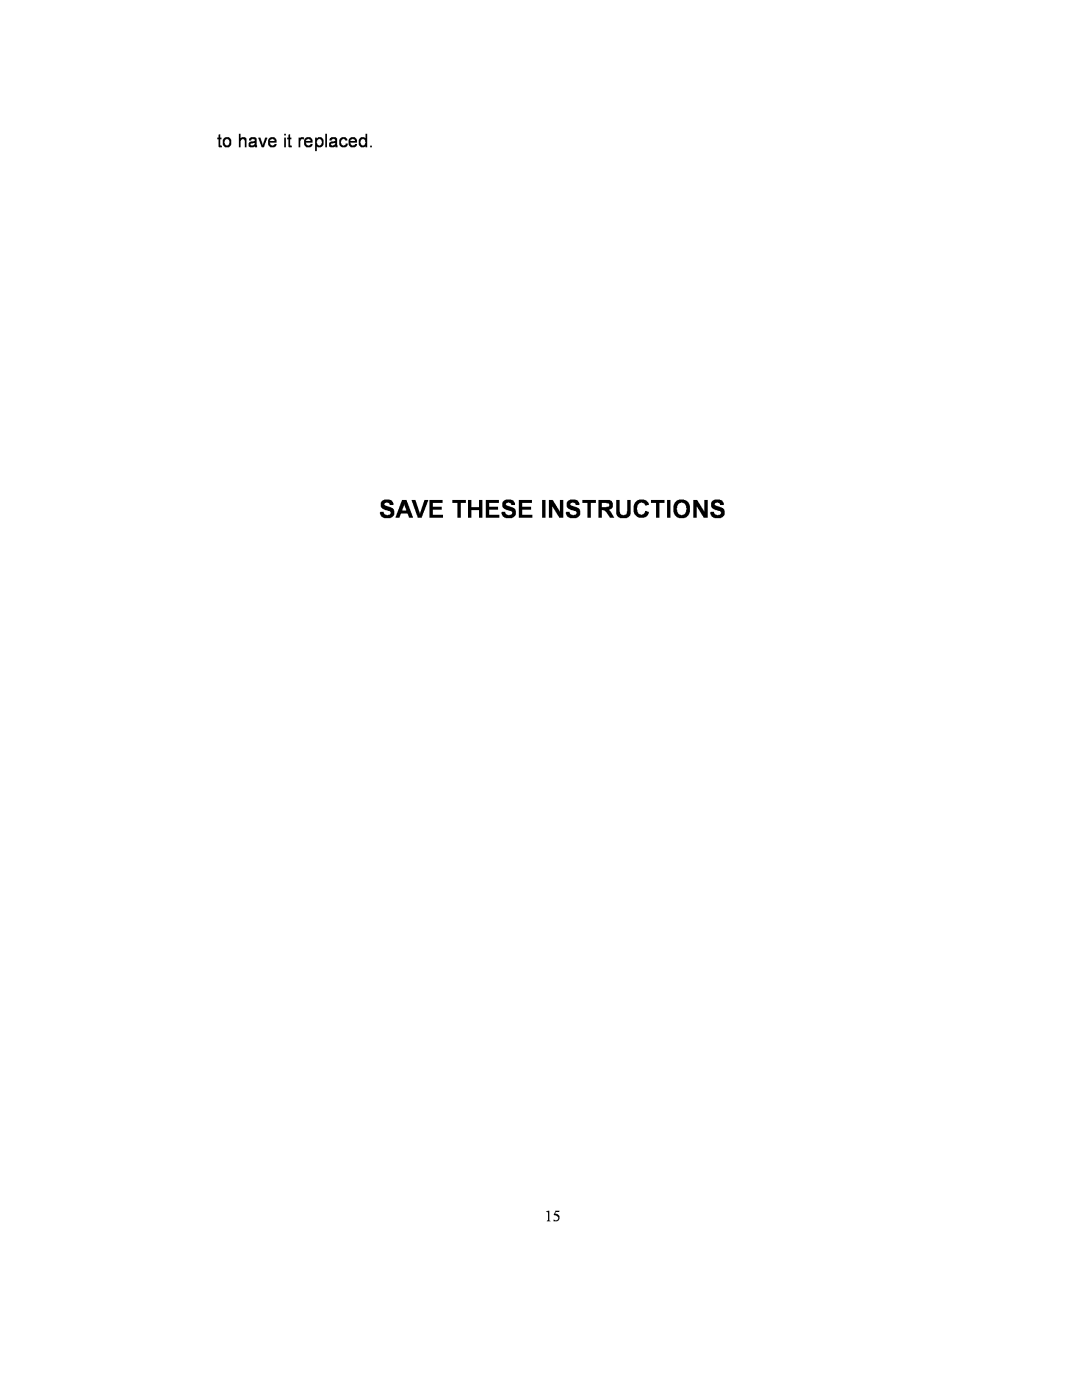 Sunbeam SMW978 owner manual Save These Instructions, to have it replaced 